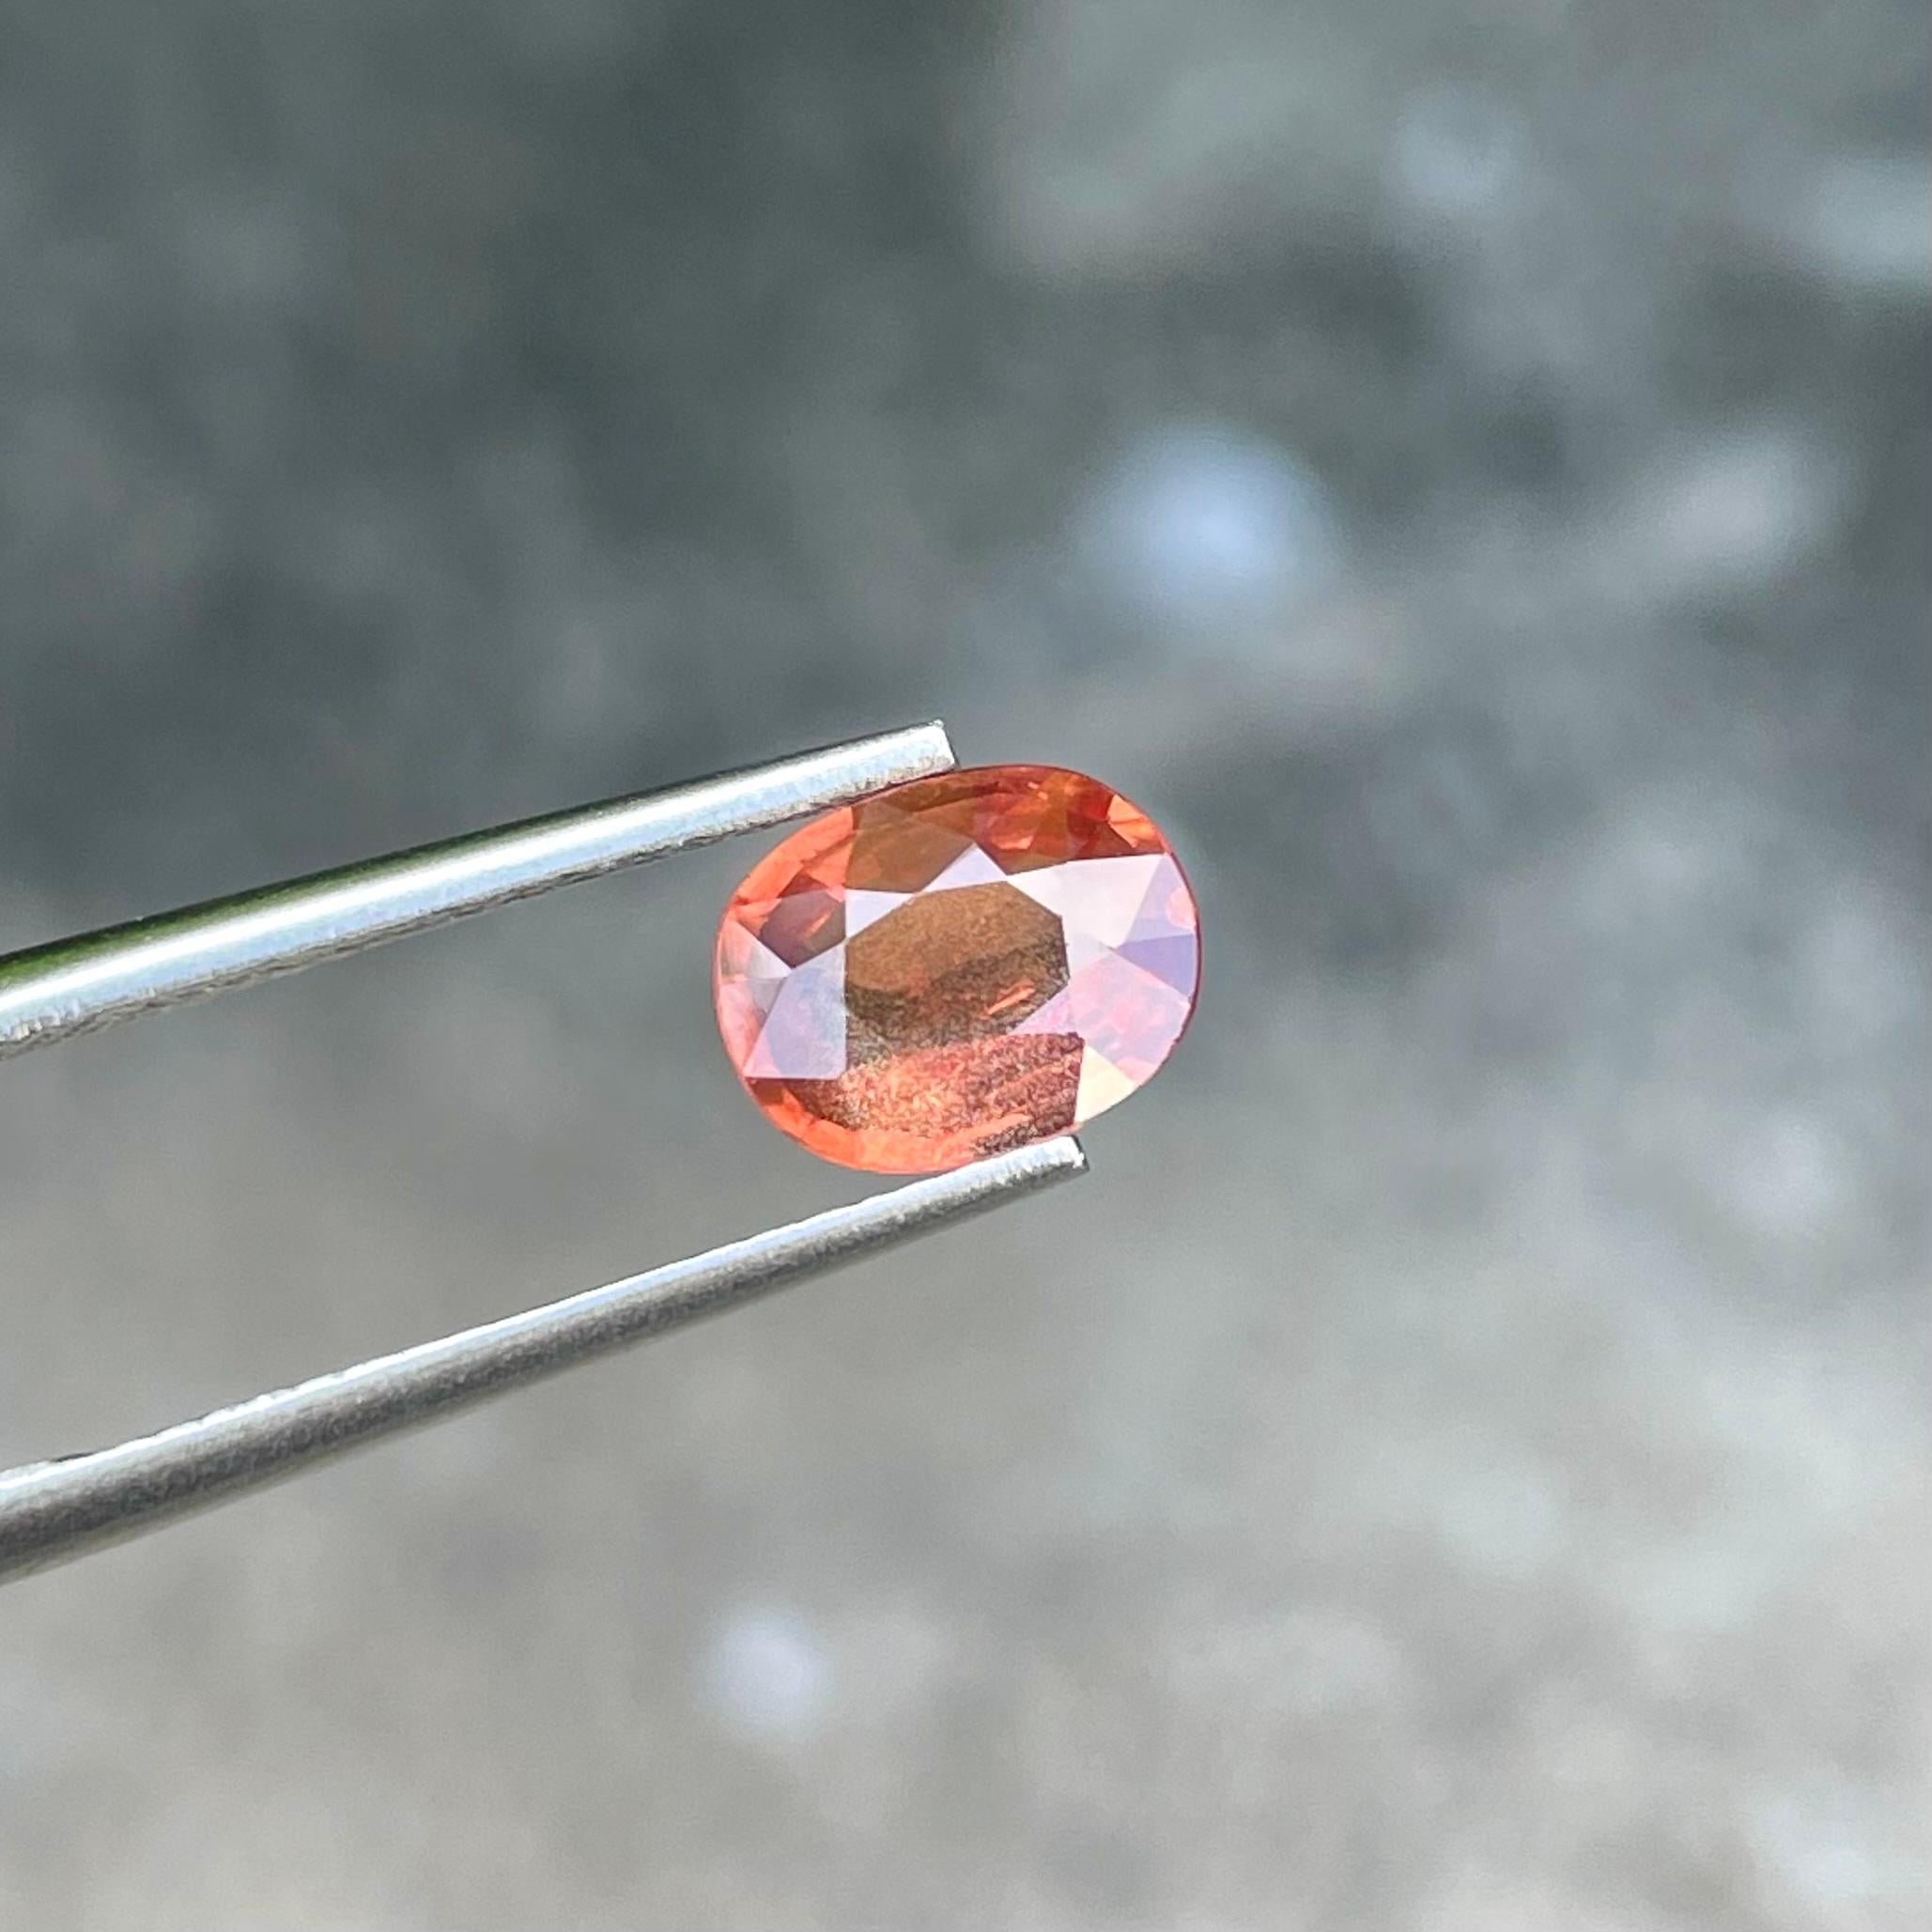 Weight 1.62 carats 
Dimensions 8.06x6.33x3.34 mm
Clarity: VVS
Treatment: None
Origin: Sri lanka
Shape: Oval
Cut: Step Oval




Introducing the Soft Orange Sapphire, a truly captivating gemstone that boasts a refined elegance and a weighty 1.62